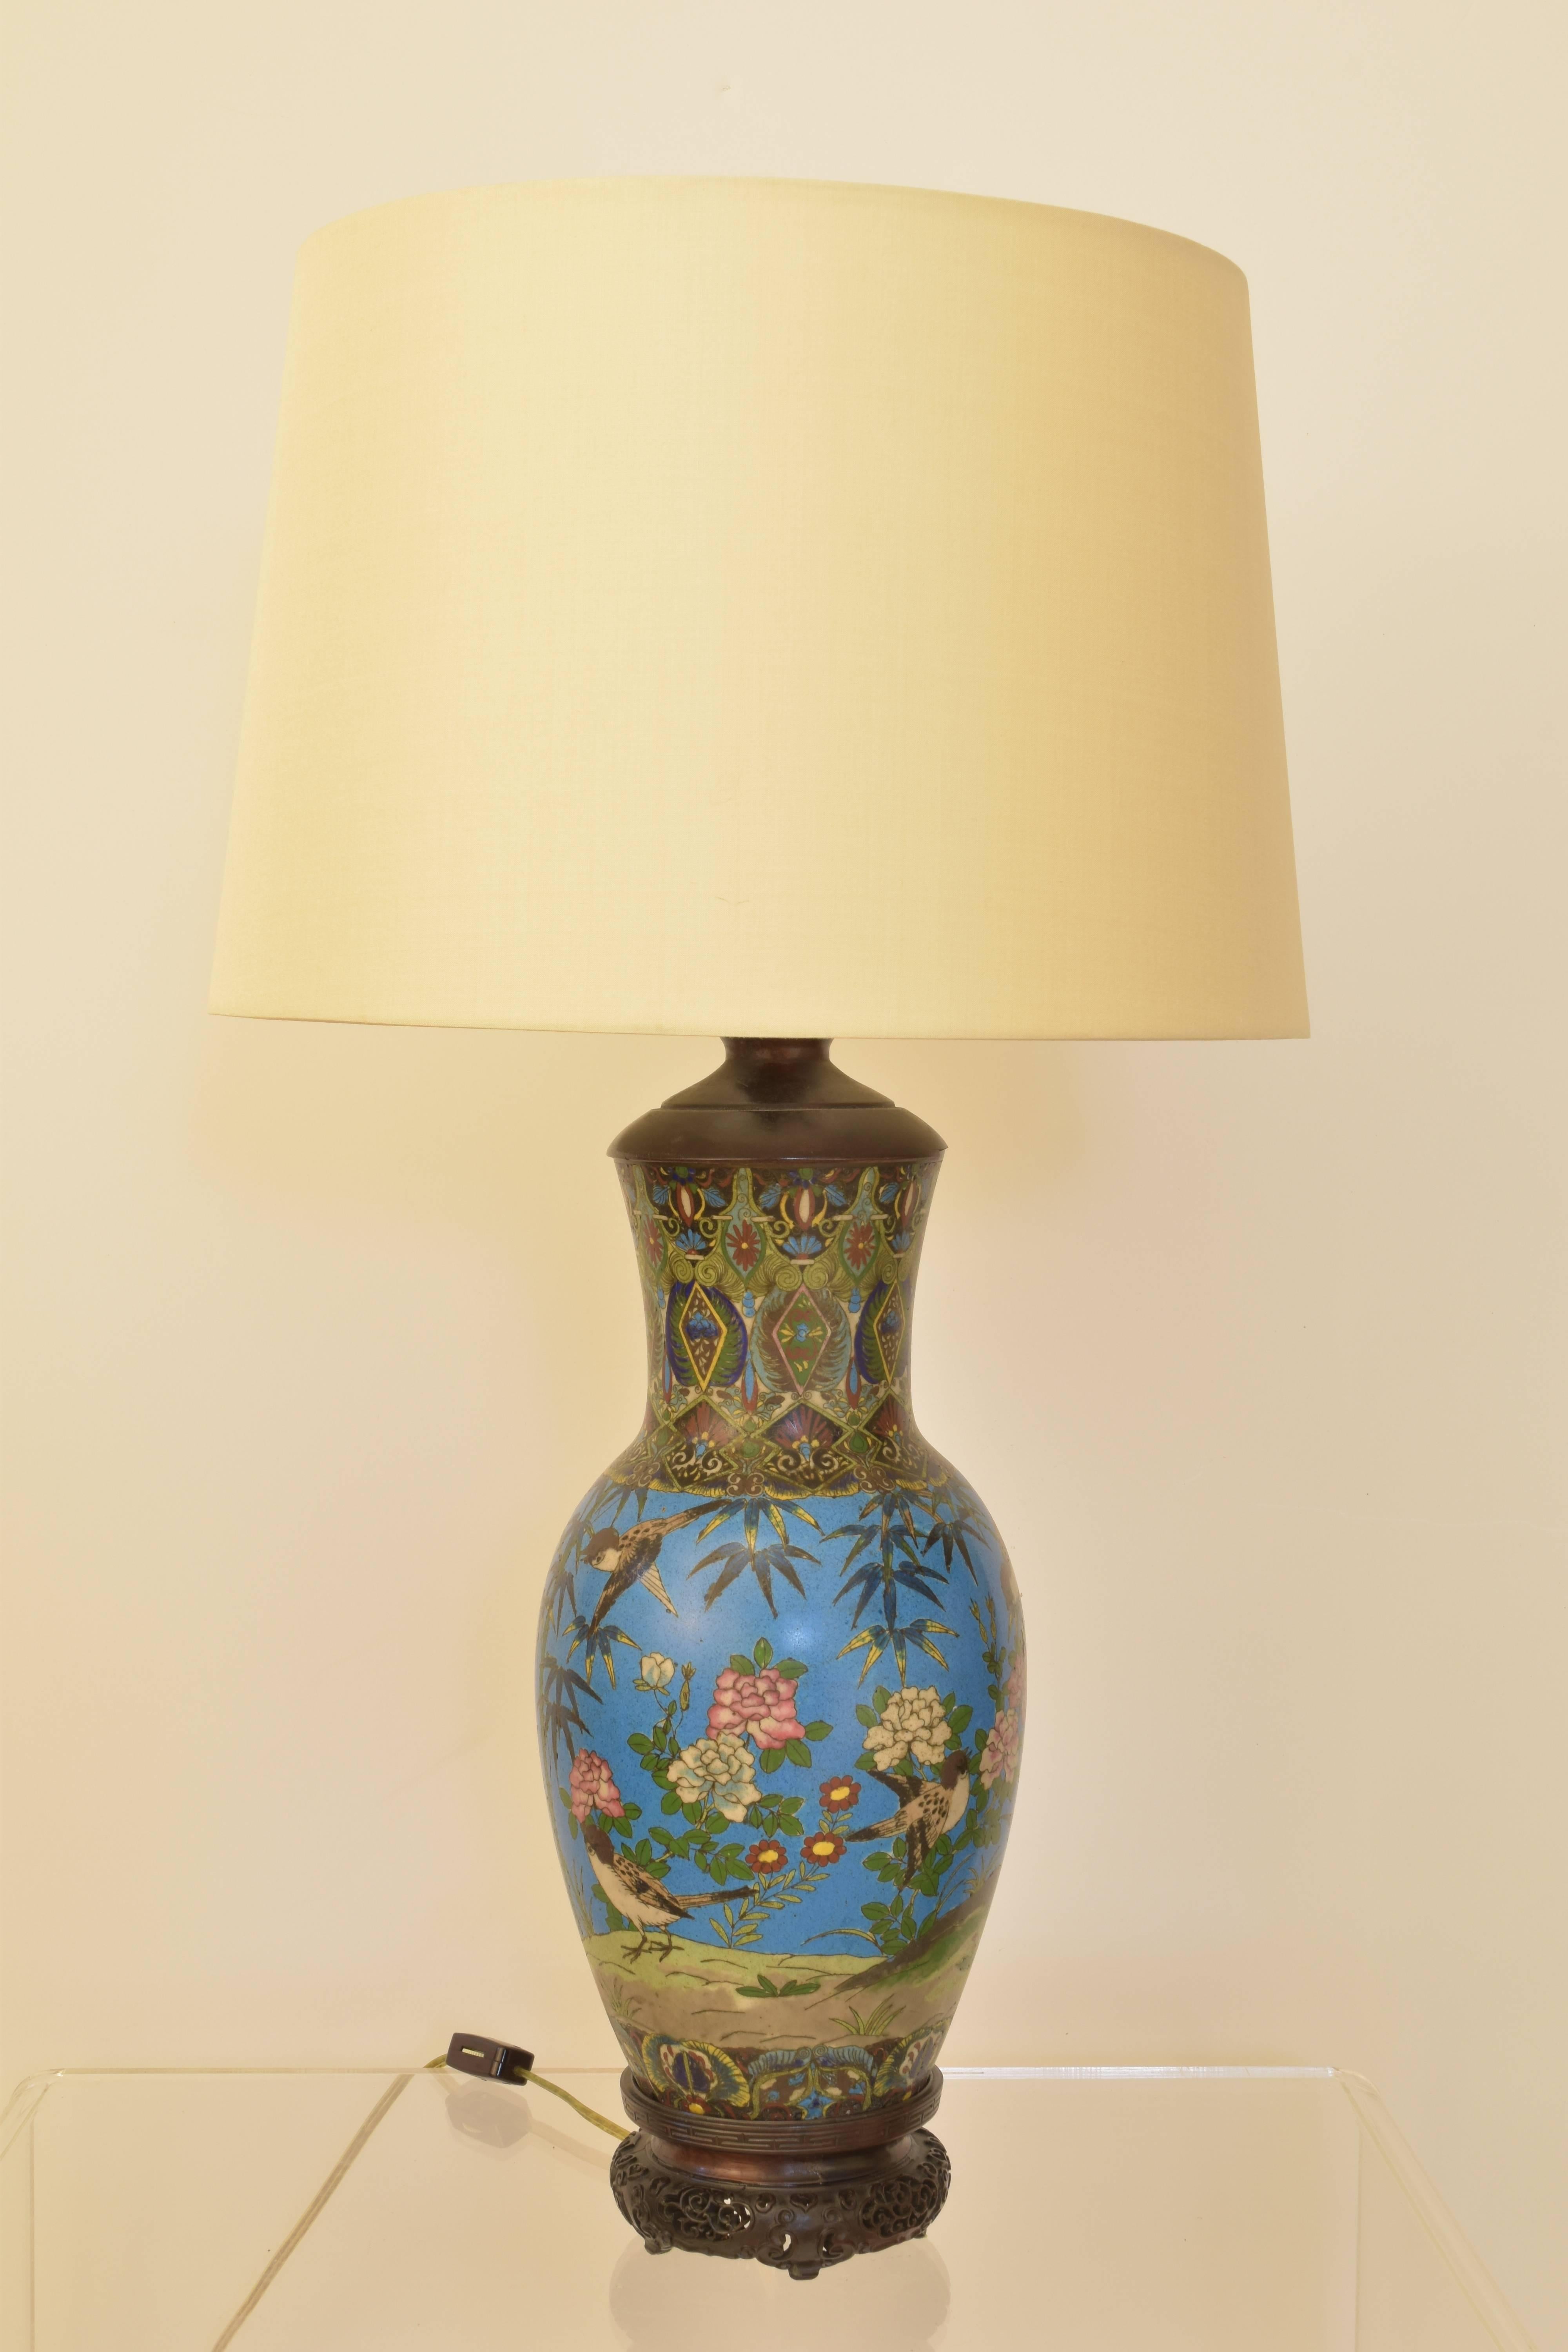 An early cloisonné vase wired as a lamp in the 20th century on a vintage base with an amber finial. The lamp is exceptional with vivid shades of blue and bird and floral decoration throughout.

Lamp measures 26.5